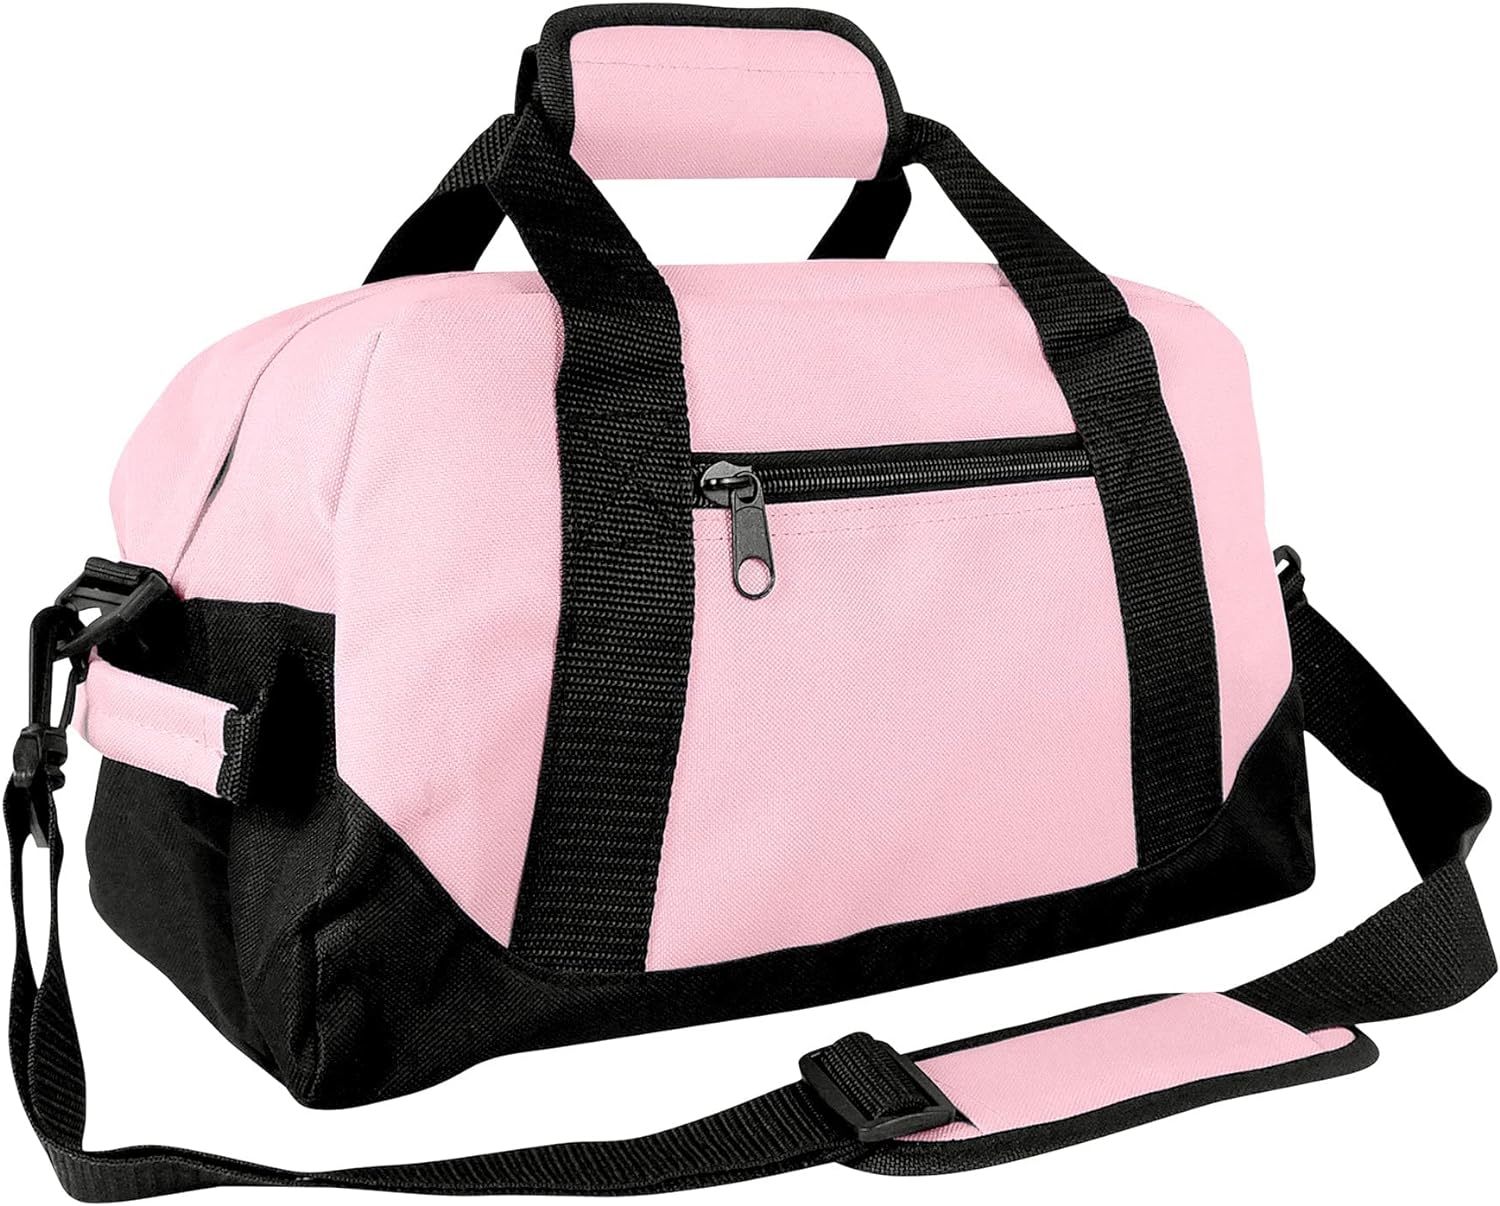 Primary image for 14" Small Duffle Bag Two Toned Gym Travel Bag